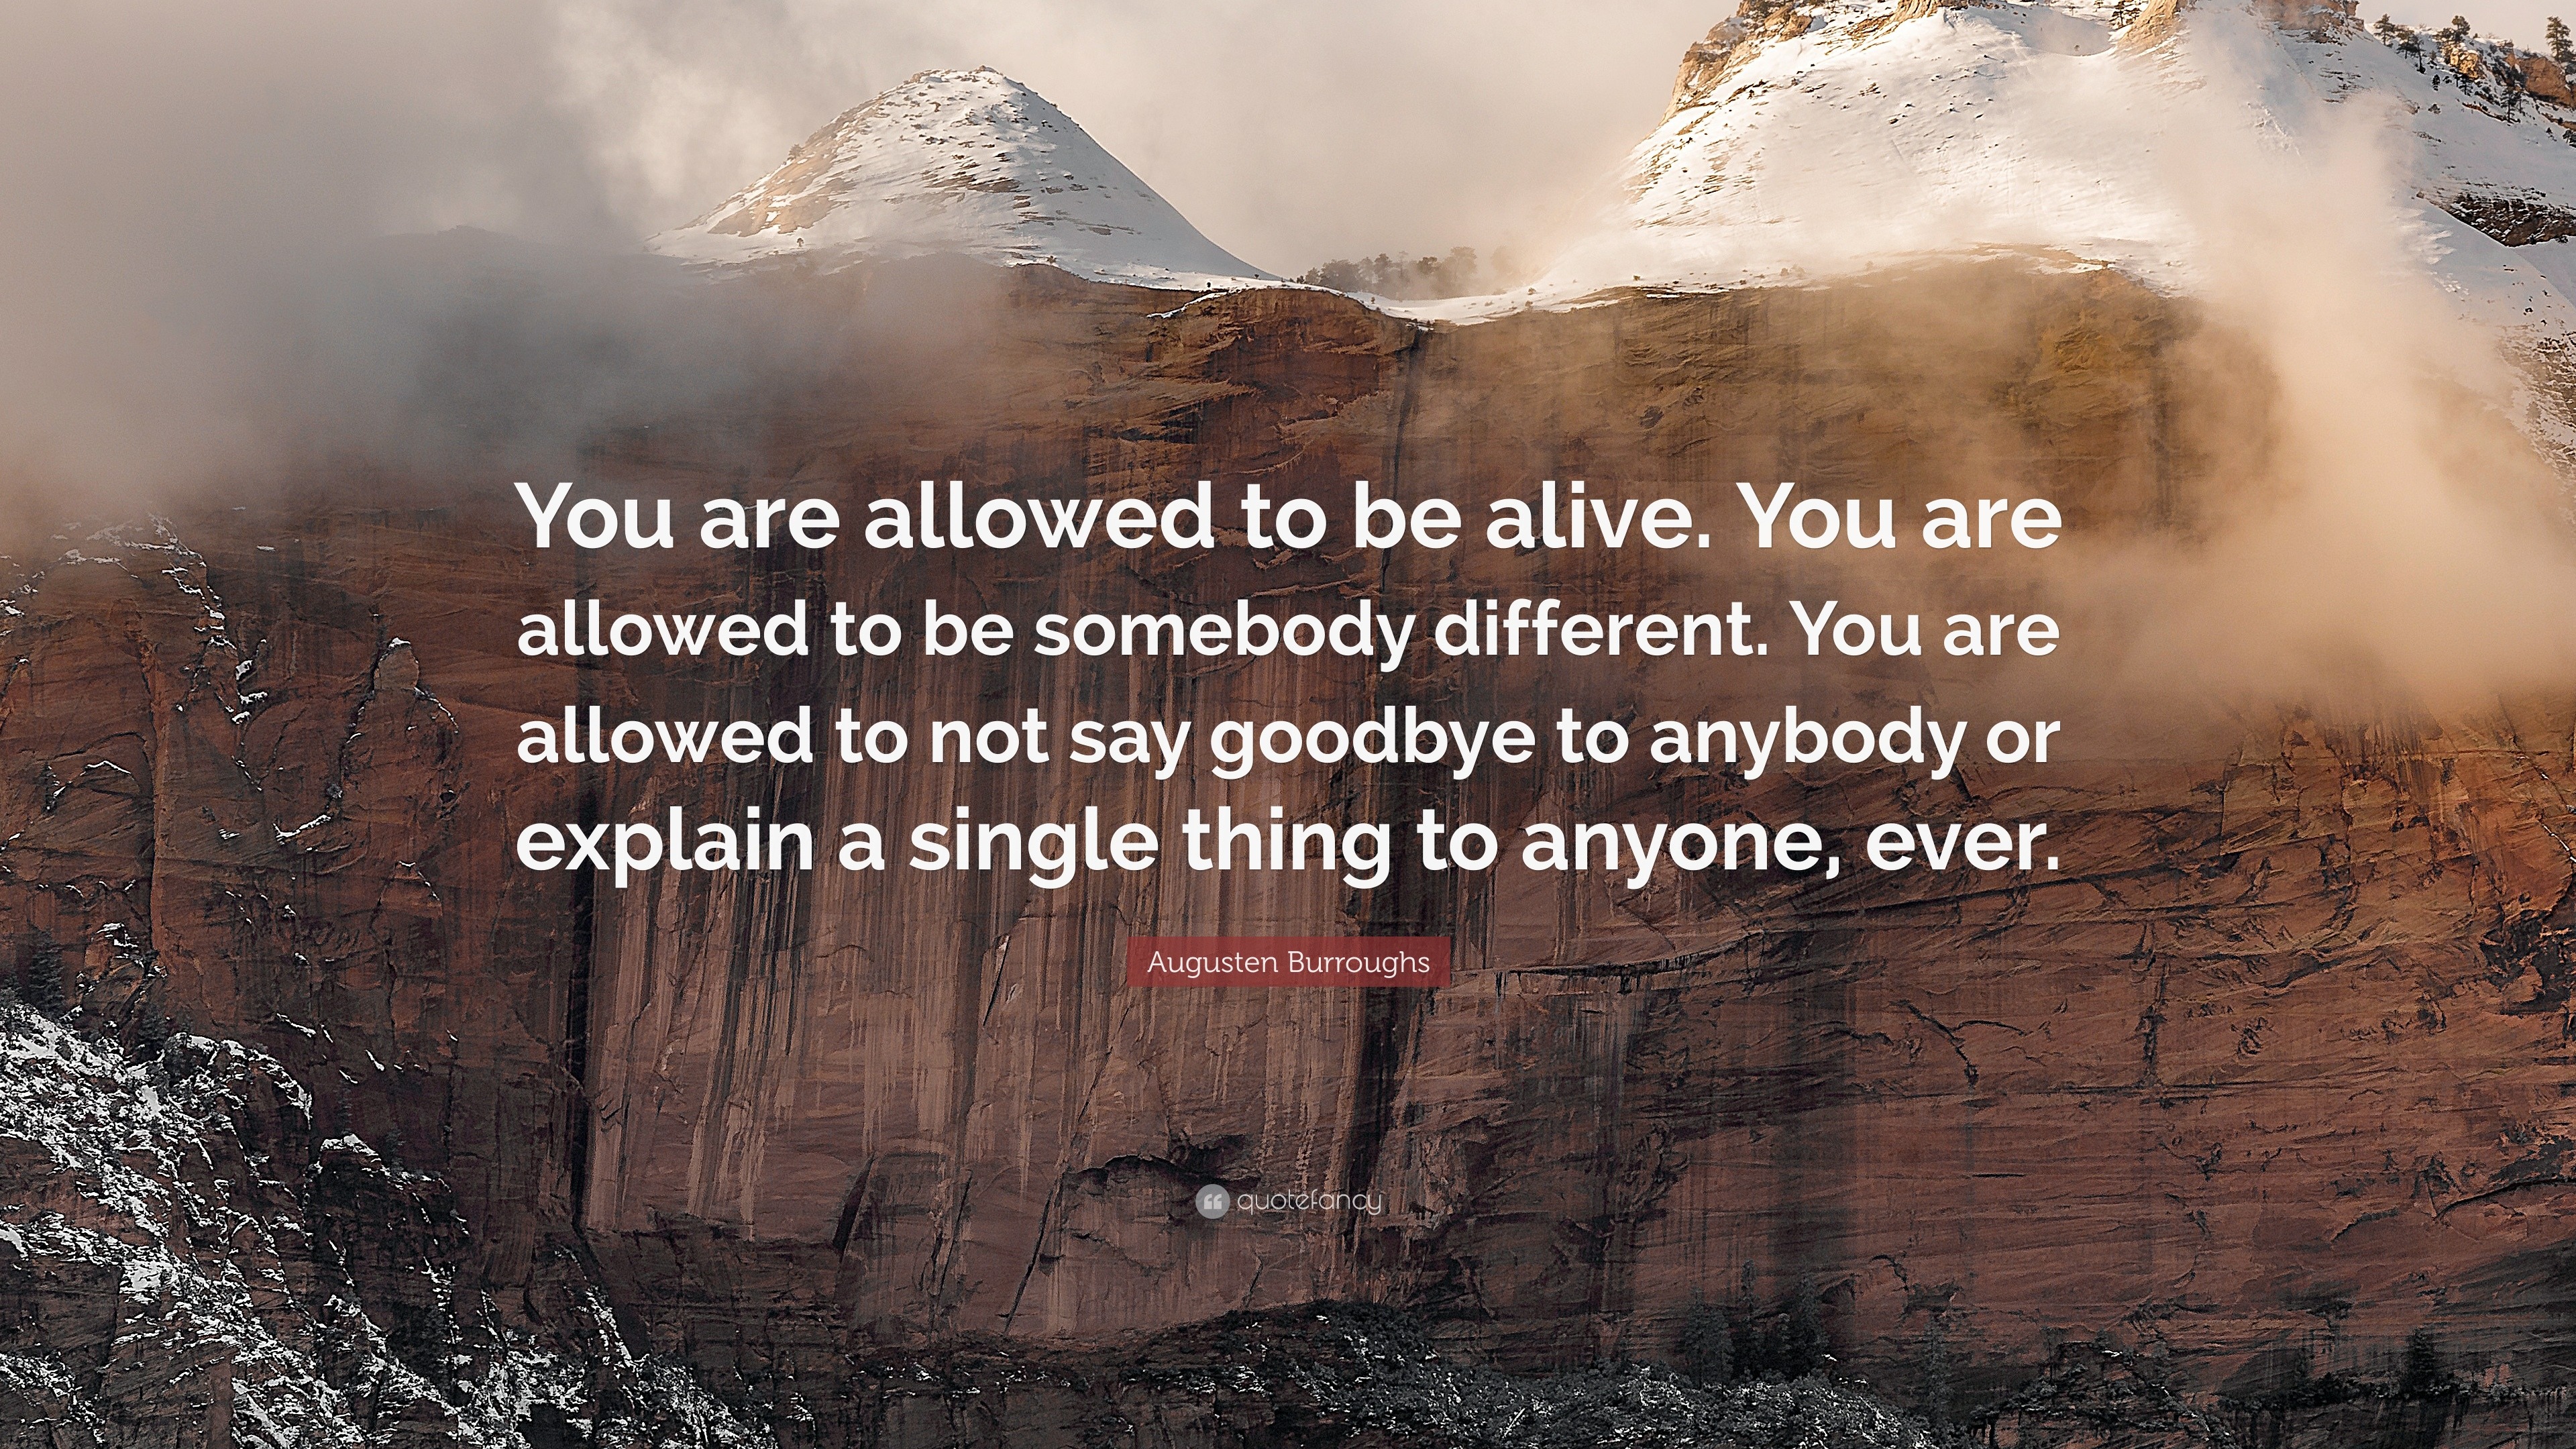 Goodbye Quotes “You are allowed to be alive You are allowed to be